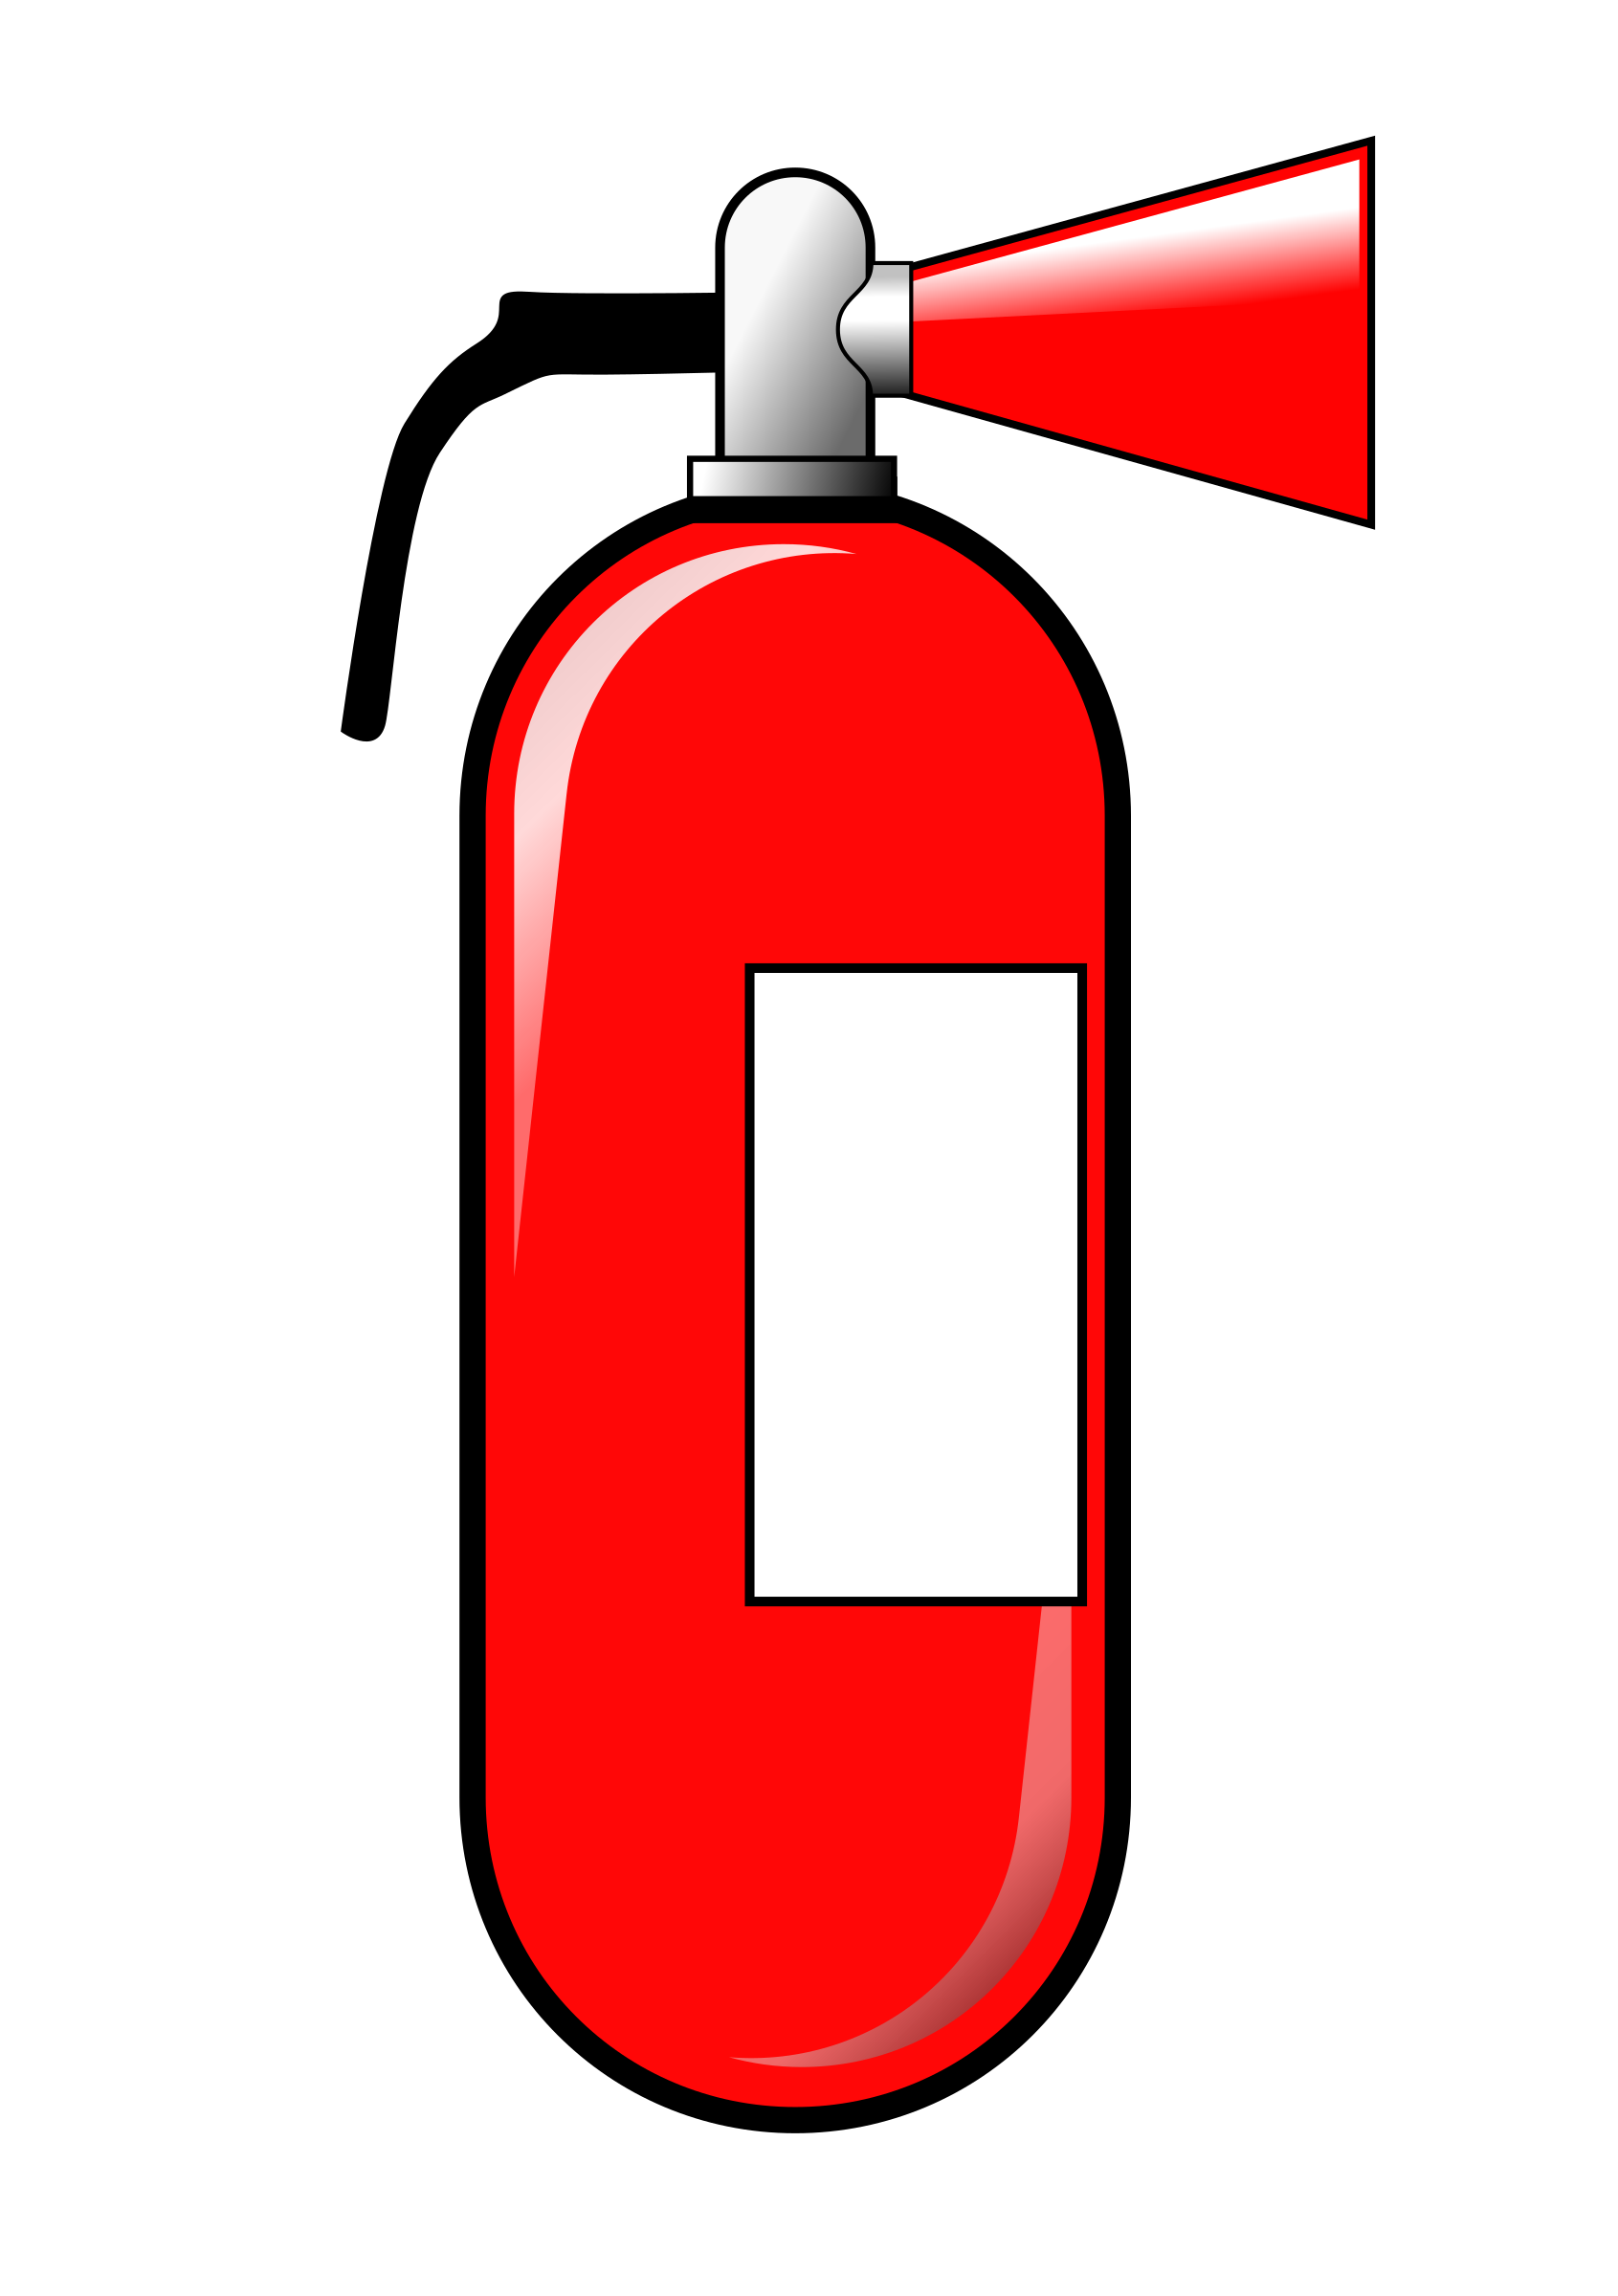 Fire extinguisher symbol, white on red Stickers by Mhea | Redbubble